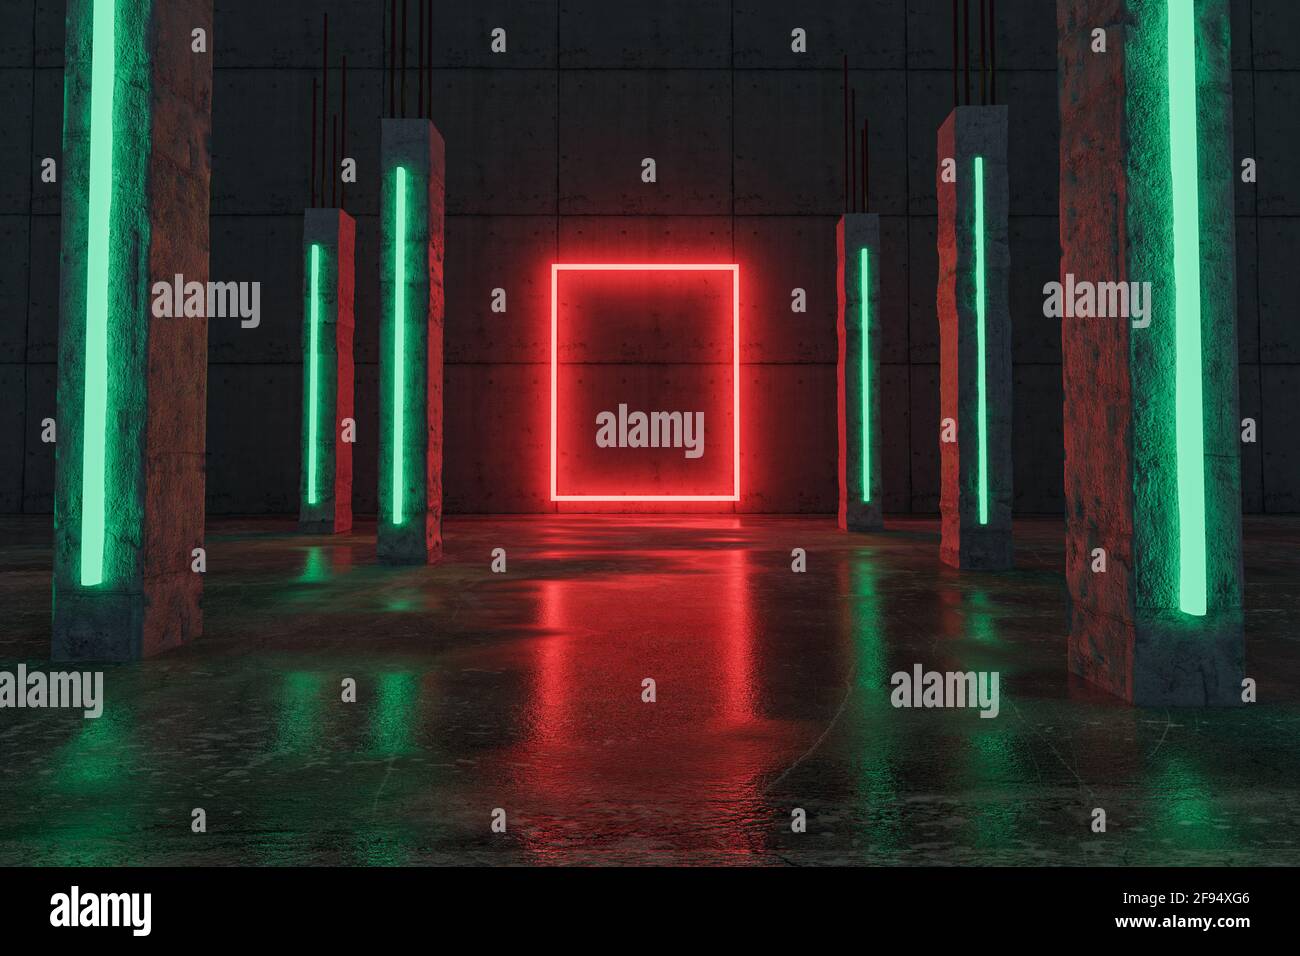 3d rendering of red lighten rectangle shape next by green concrete pillars and grunge floor with puddles Stock Photo